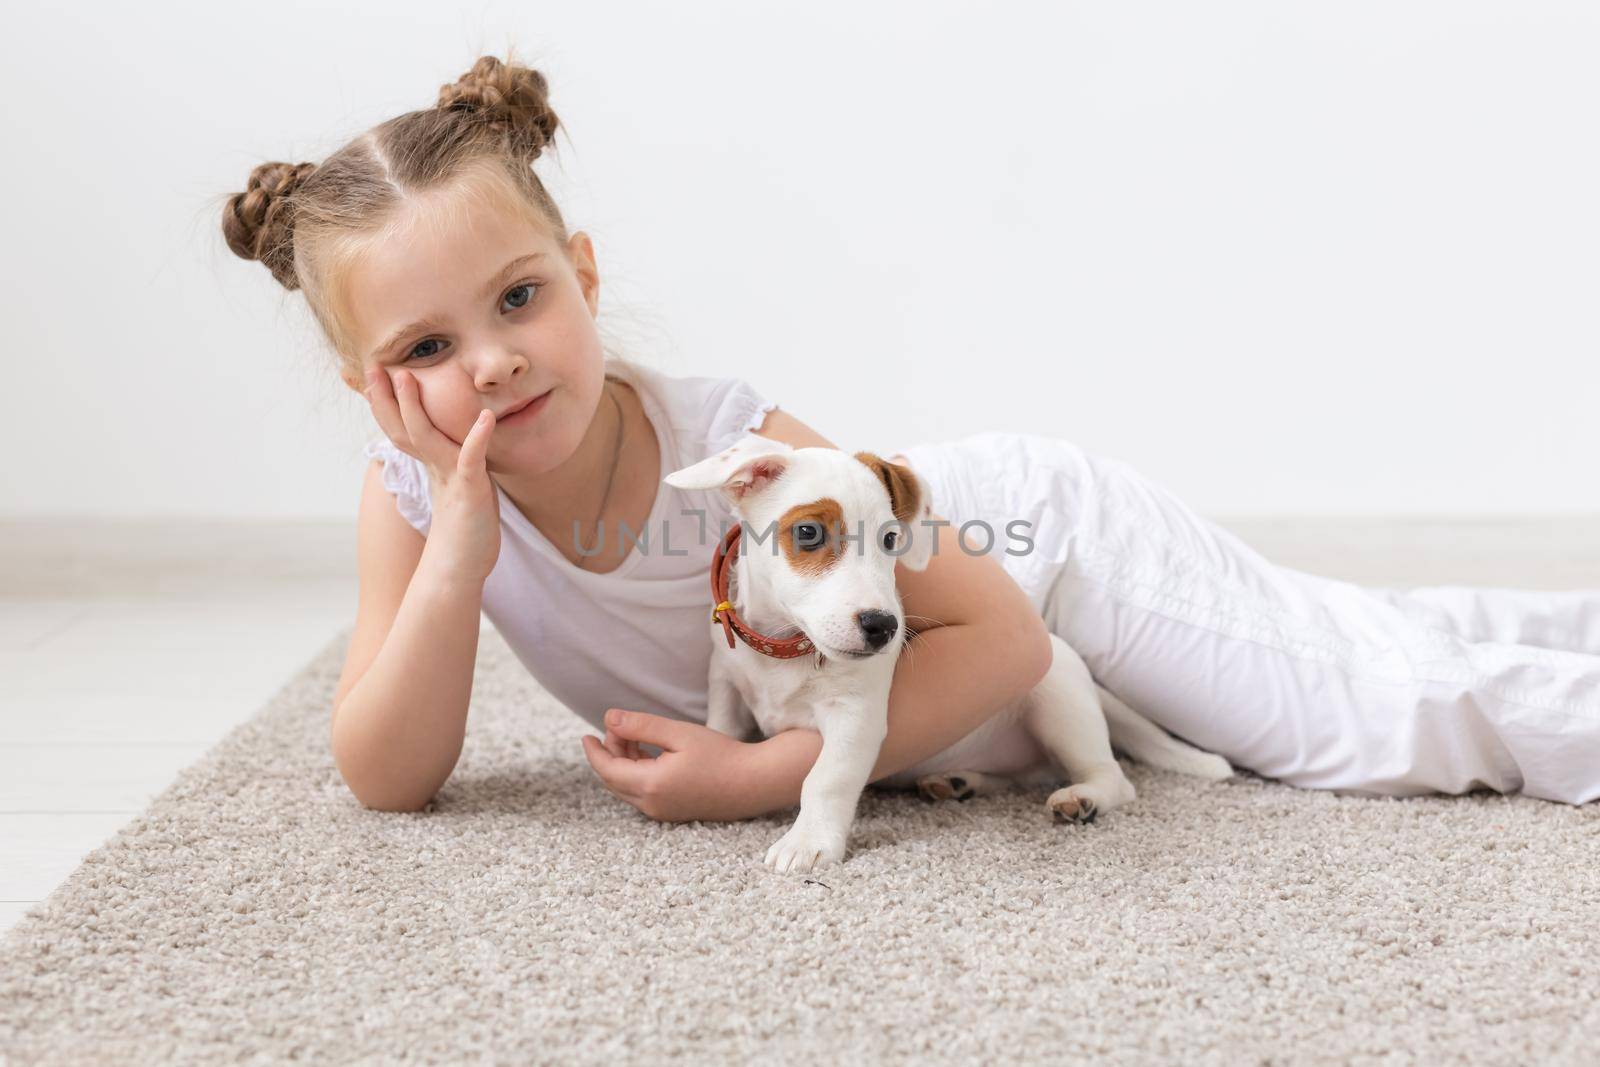 Childhood, pets and dogs concept - Little child girl posing on the floor with puppy.